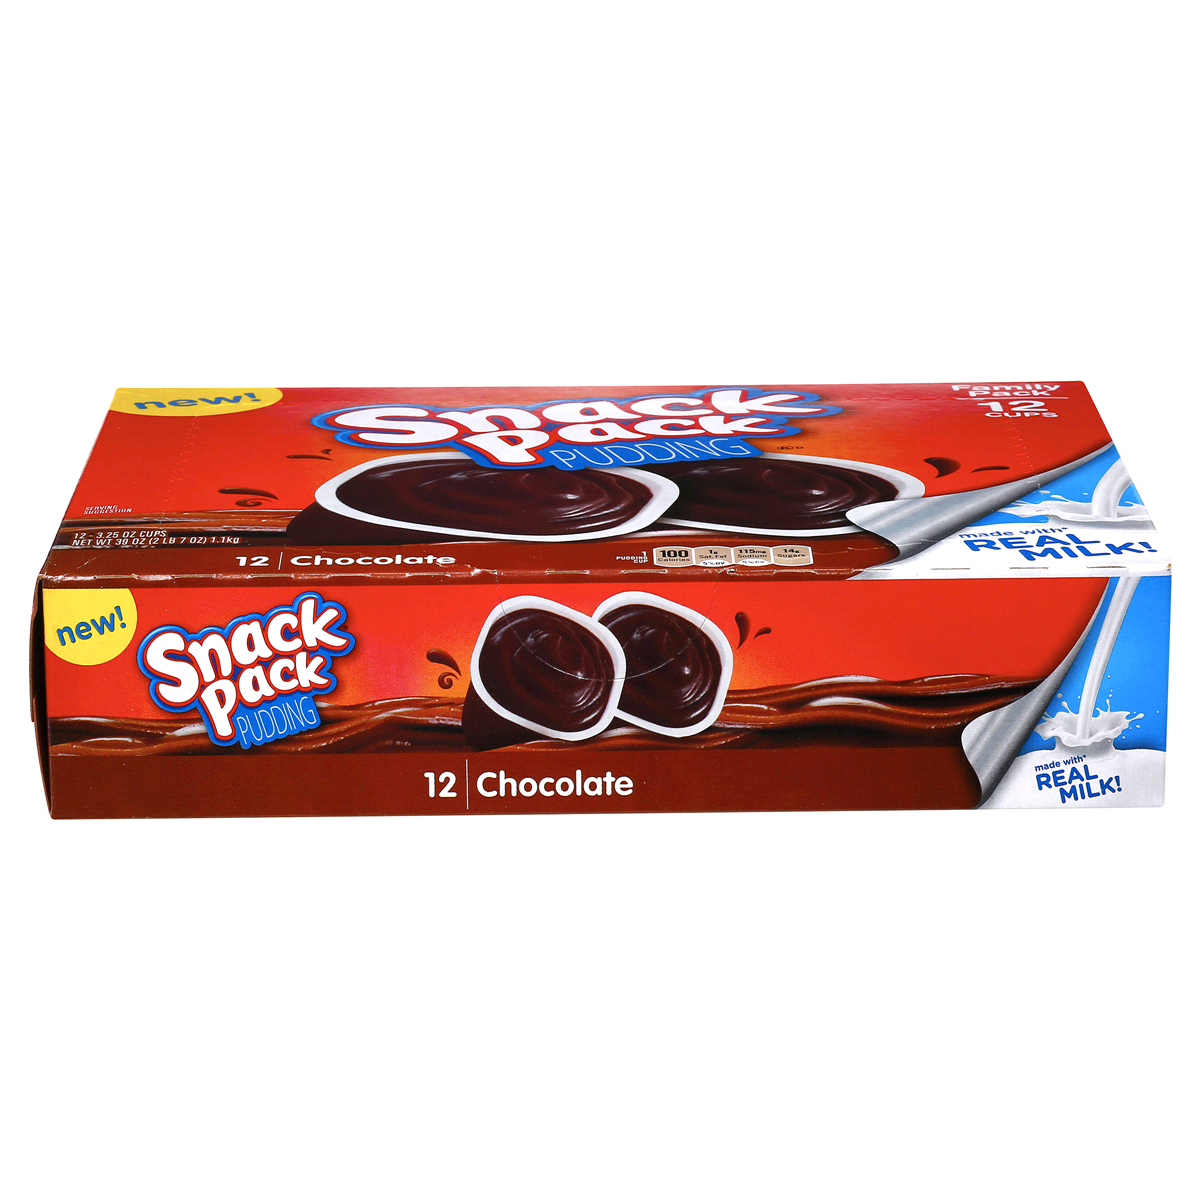 slide 6 of 6, Snack Pack Pudding Family Pack Chocolatecups, 39 oz